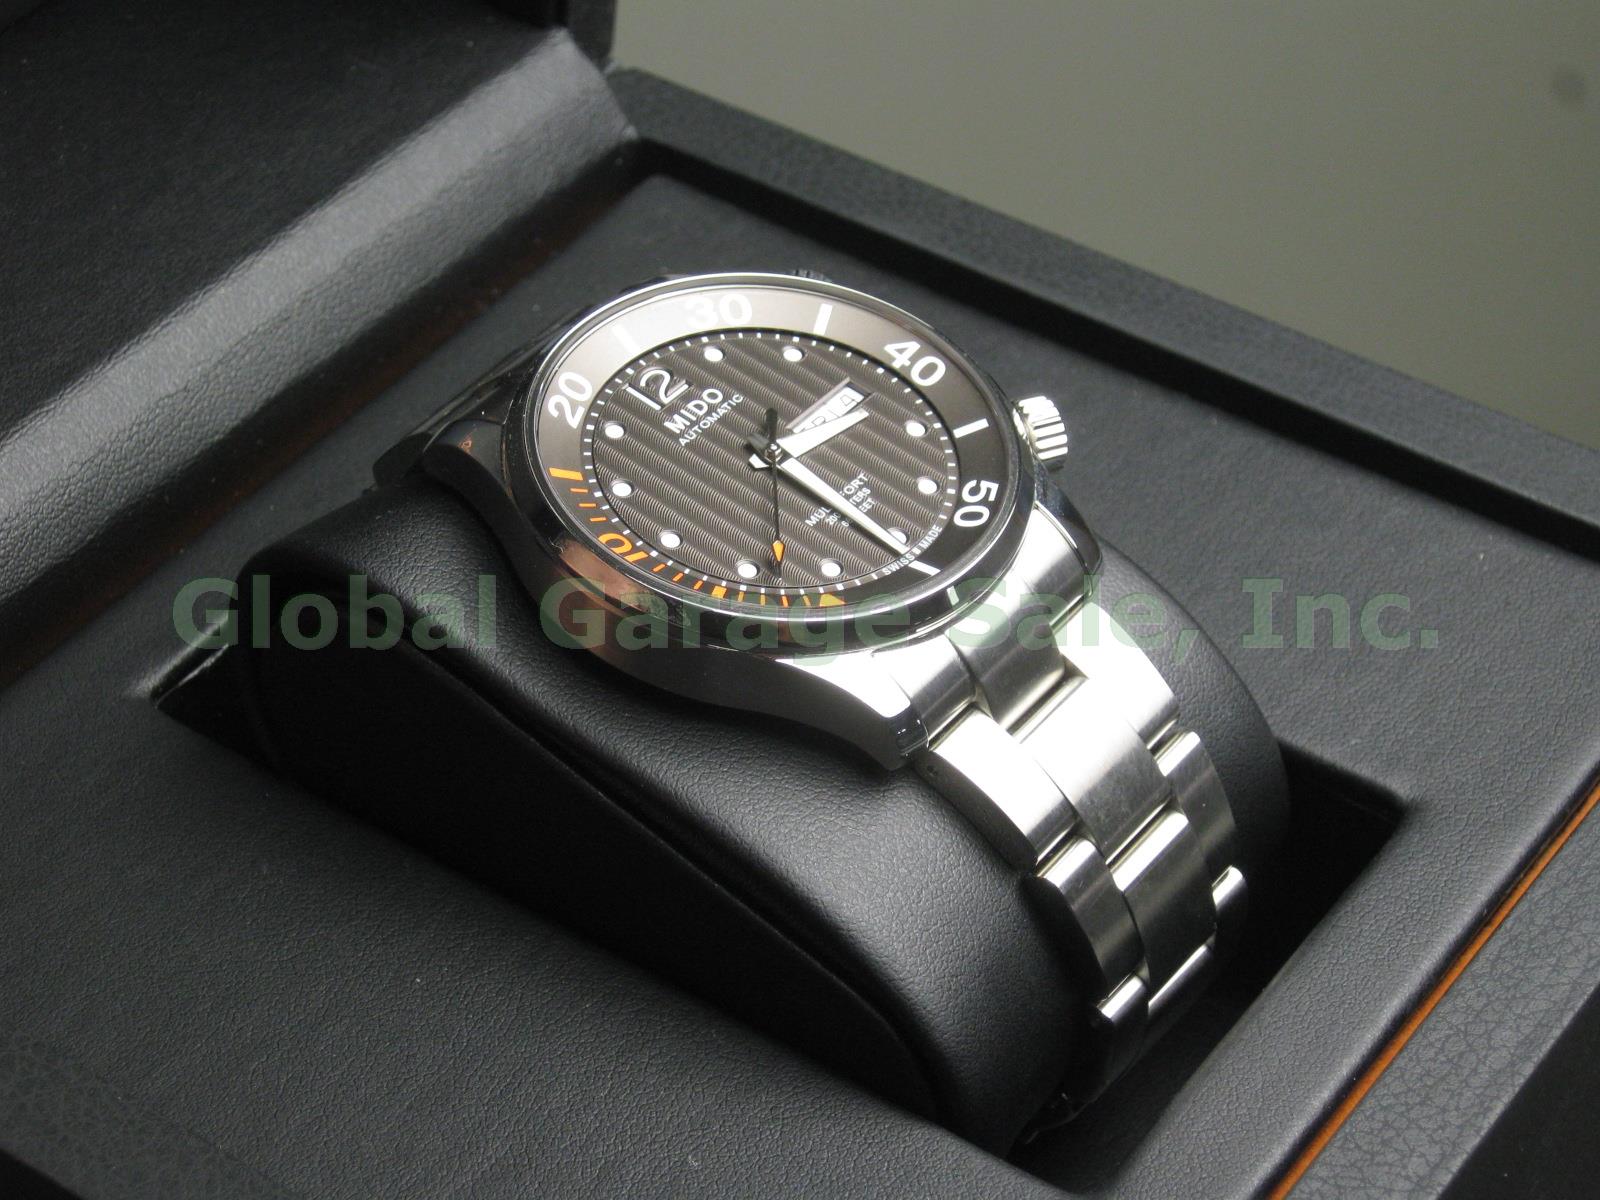 Mido Multifort M005930 A 42mm Two Crown Automatic 200M Swiss Diver Watch W/ Box+ 1